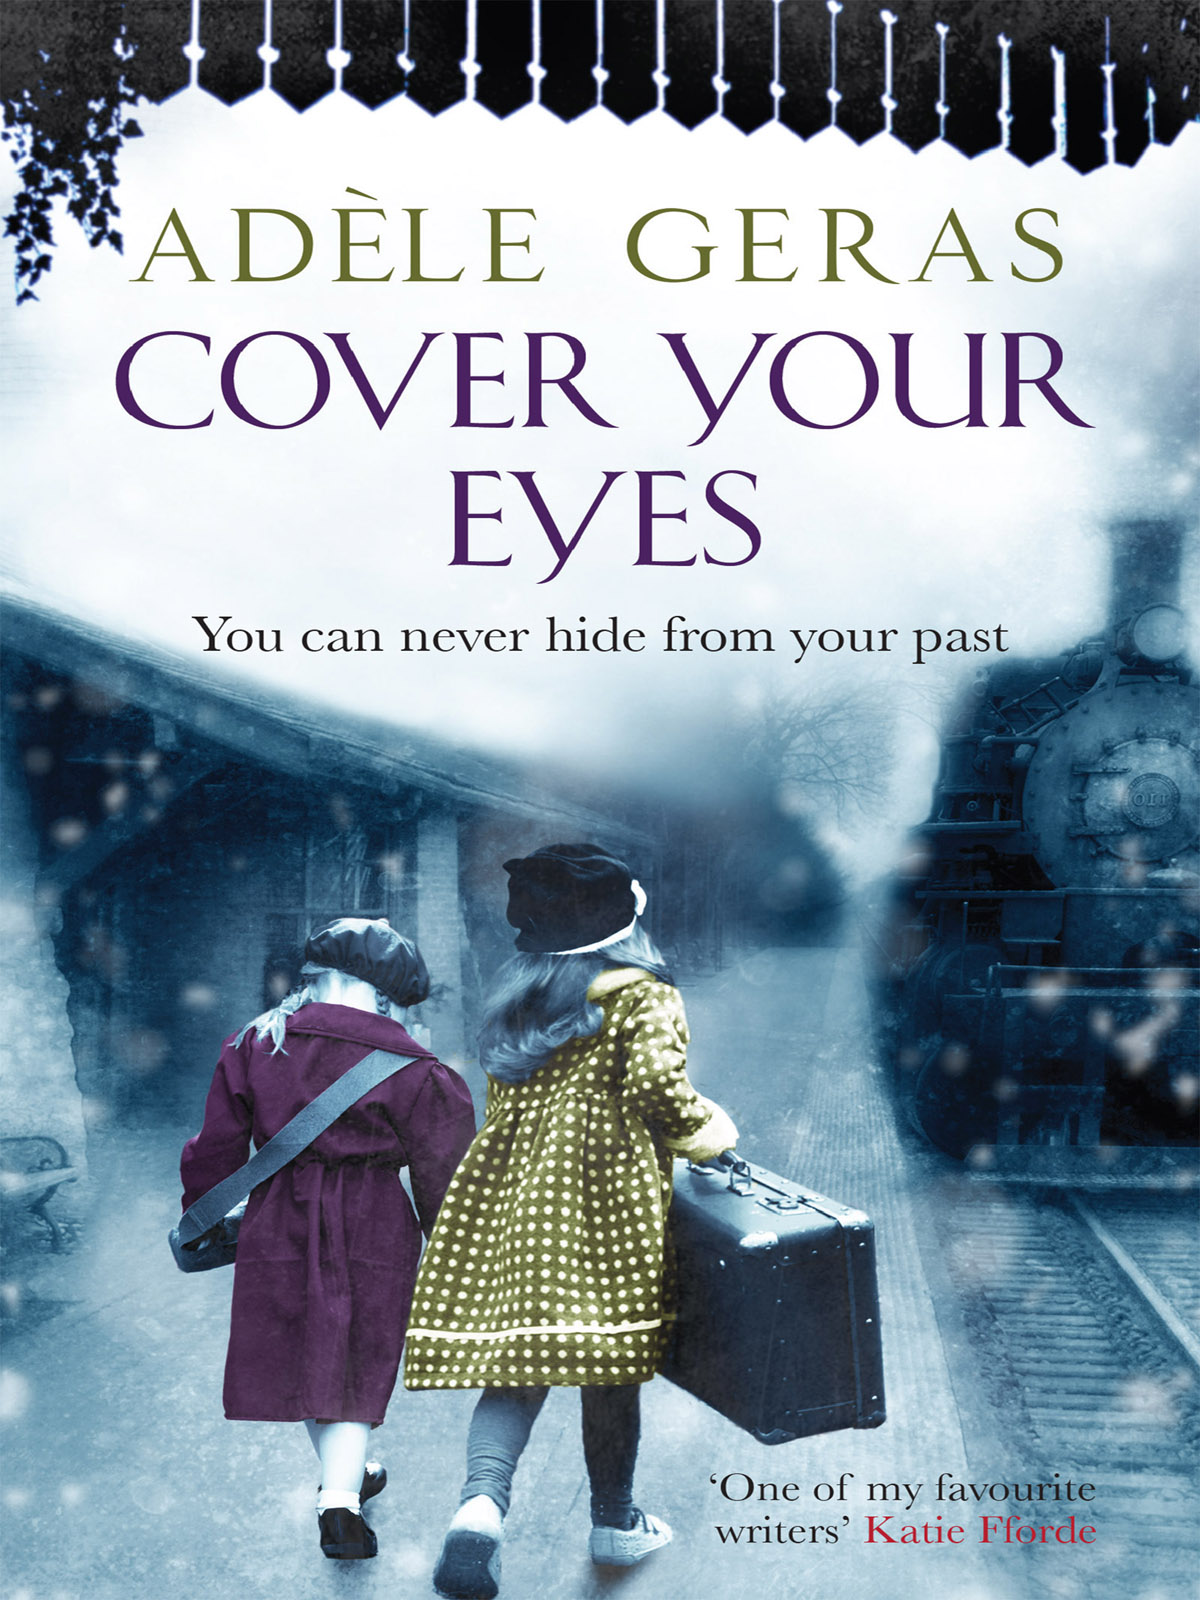 Cover Your Eyes (2014) by Adèle Geras